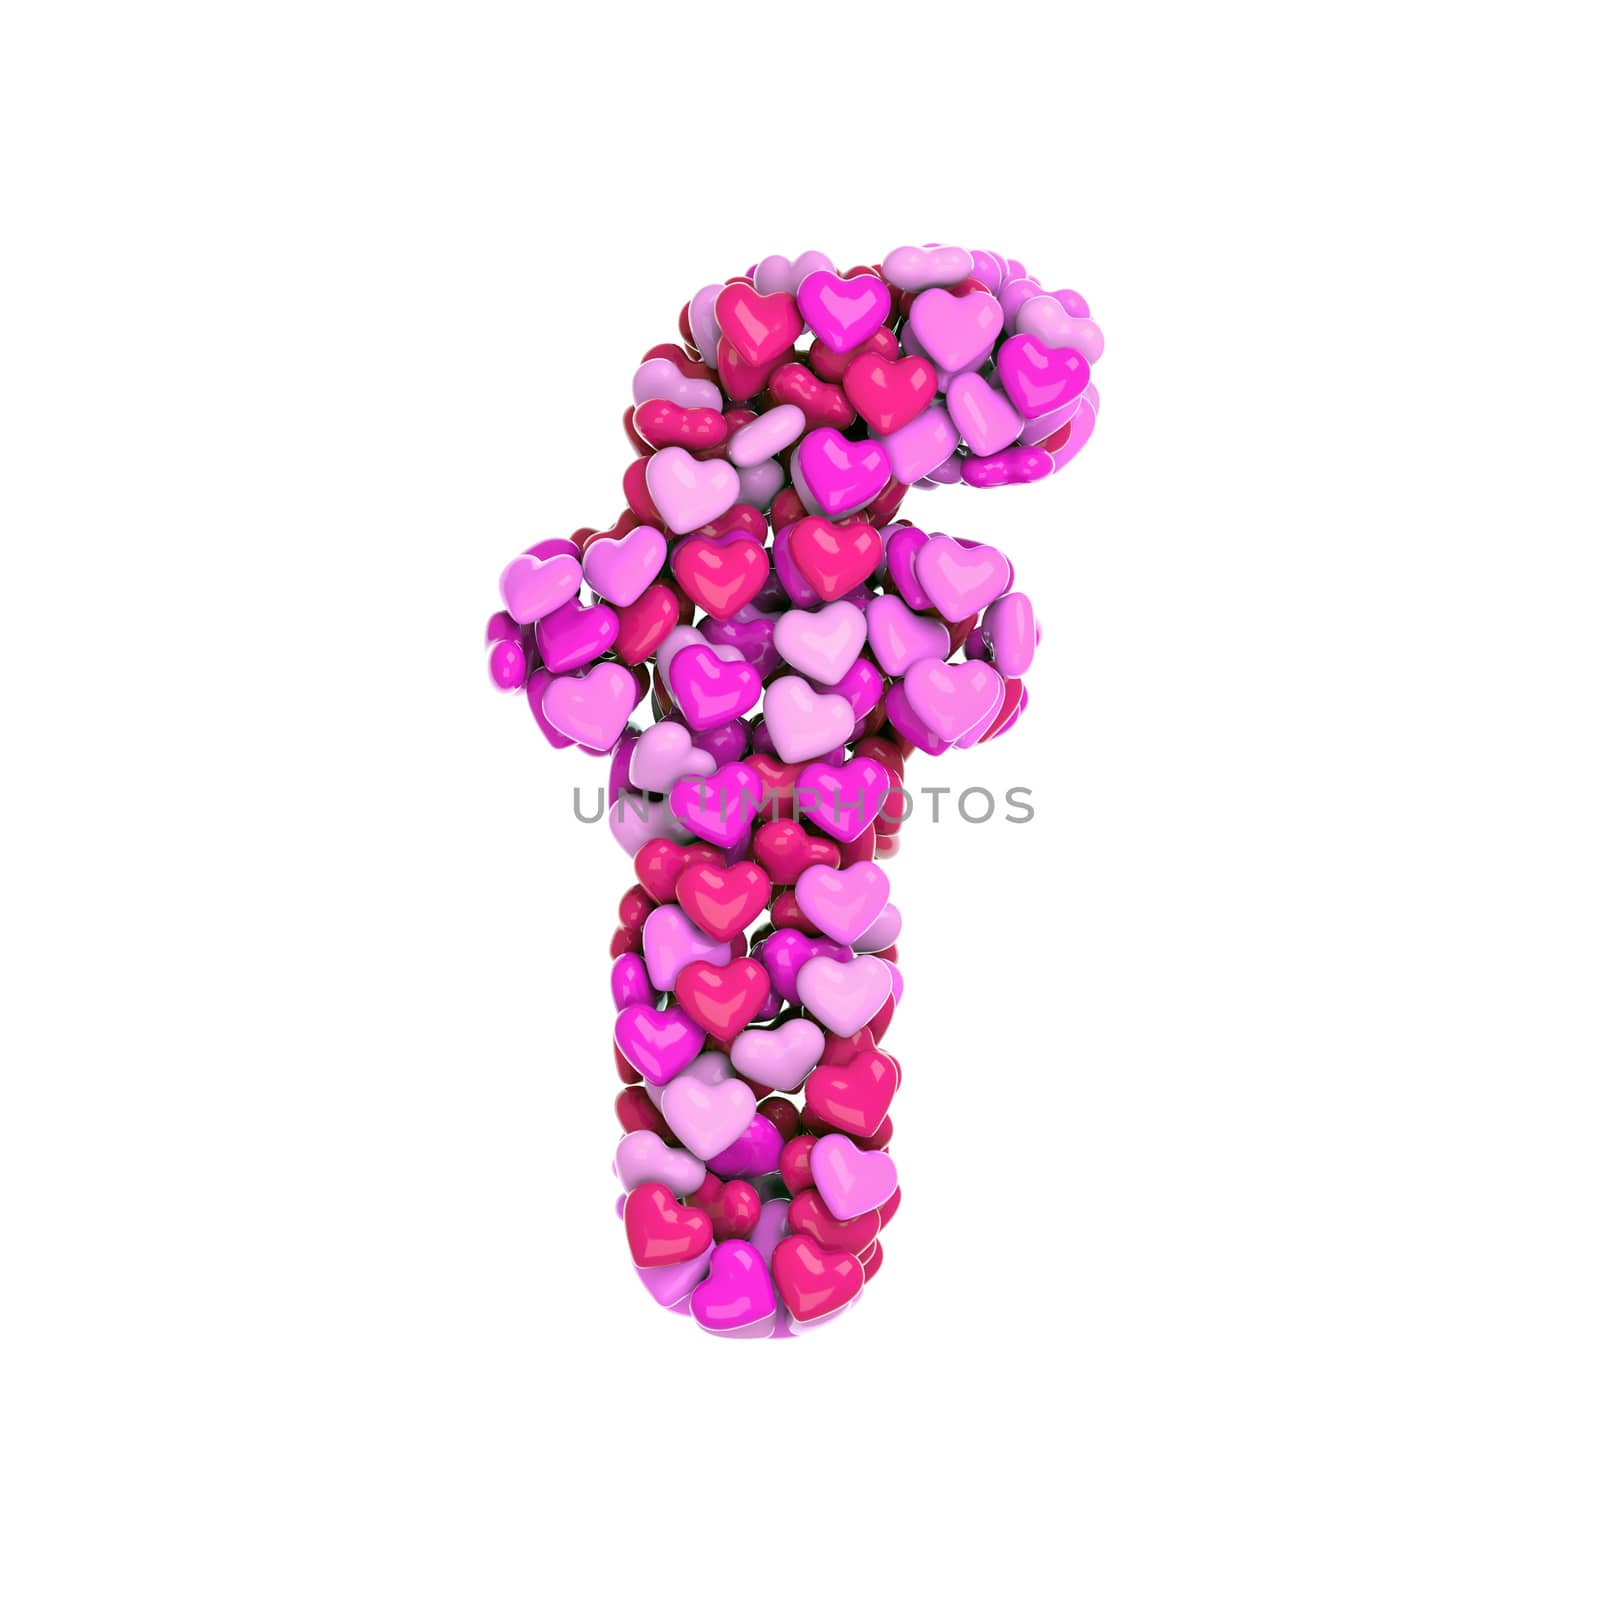 Valentine letter F - Small 3d pink hearts font - Love, passion or wedding concept by chrisroll